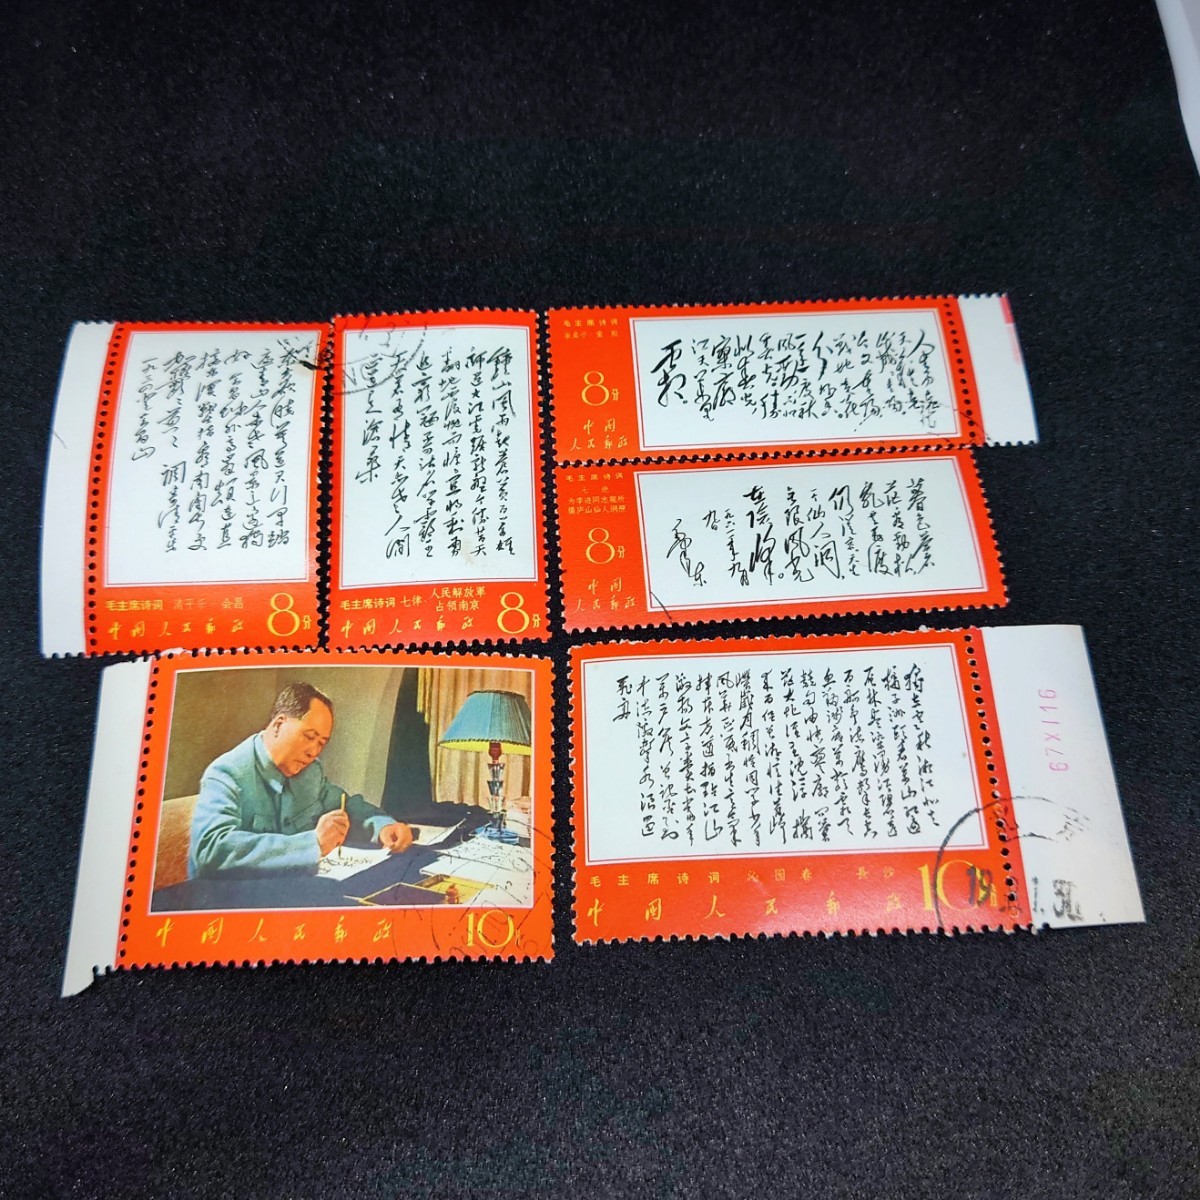  China stamp wool . seat. poetry .1967 year 10 month 6 day issue 6 sheets 1 collection Chinese person . postal one part ear attaching collection hobby Asia stamp wool . higashi Vintage 